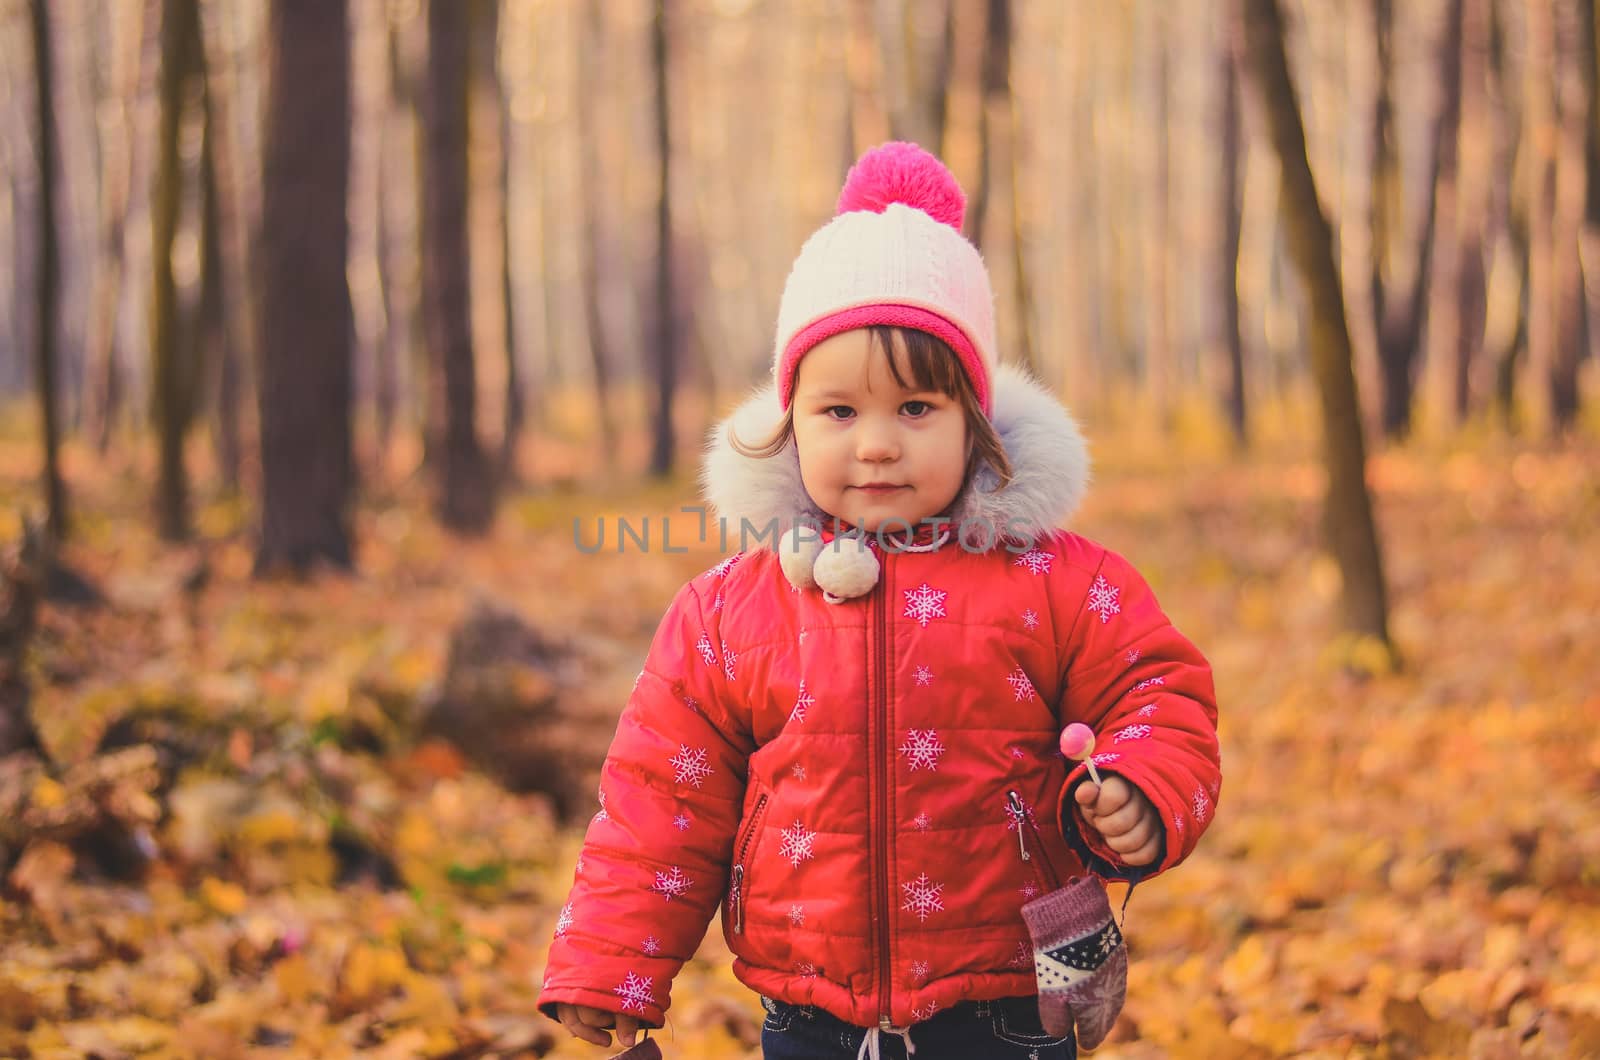 beautiful girl in winter clothes with lollipop in the autumn park by chernobrovin